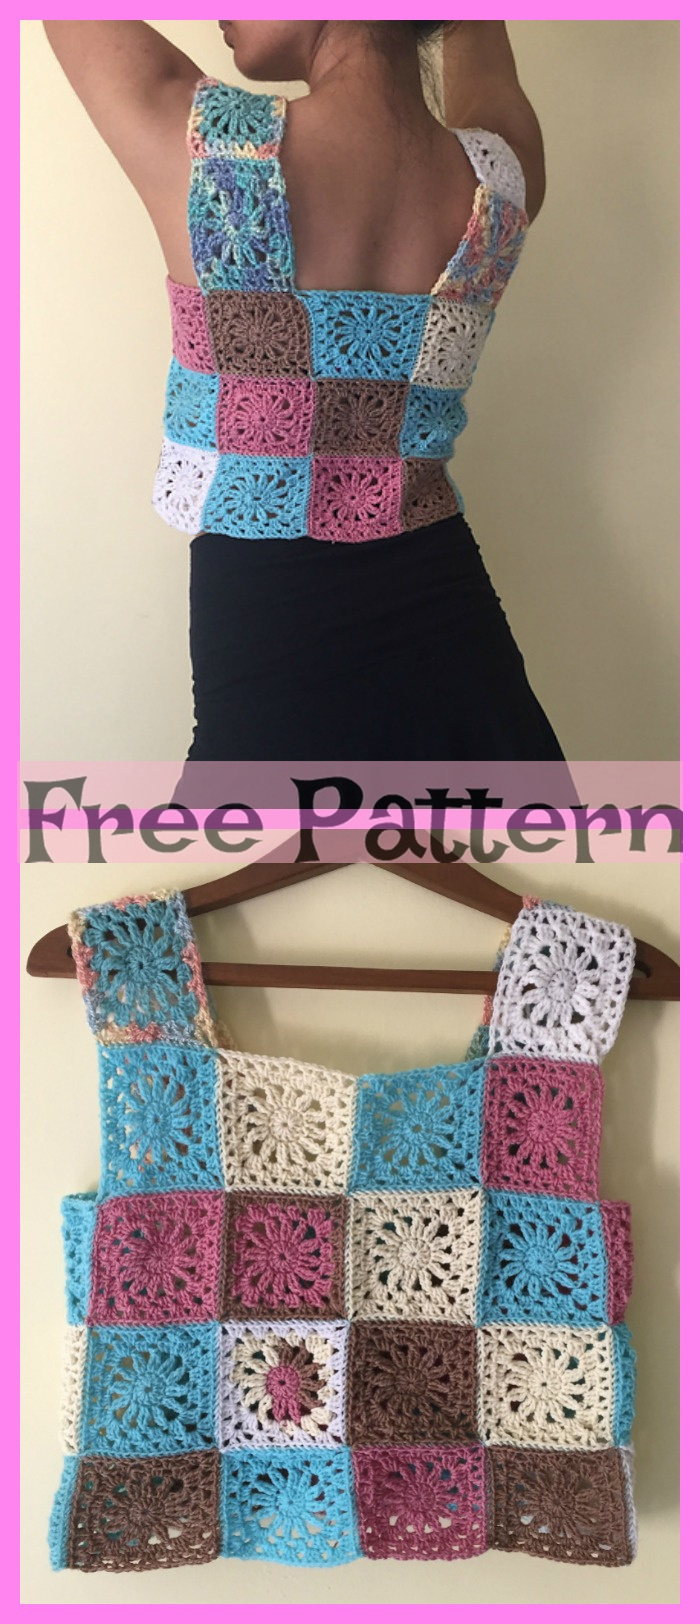 diy4ever- 10 Crochet Lace Crop Top Free Patterns 